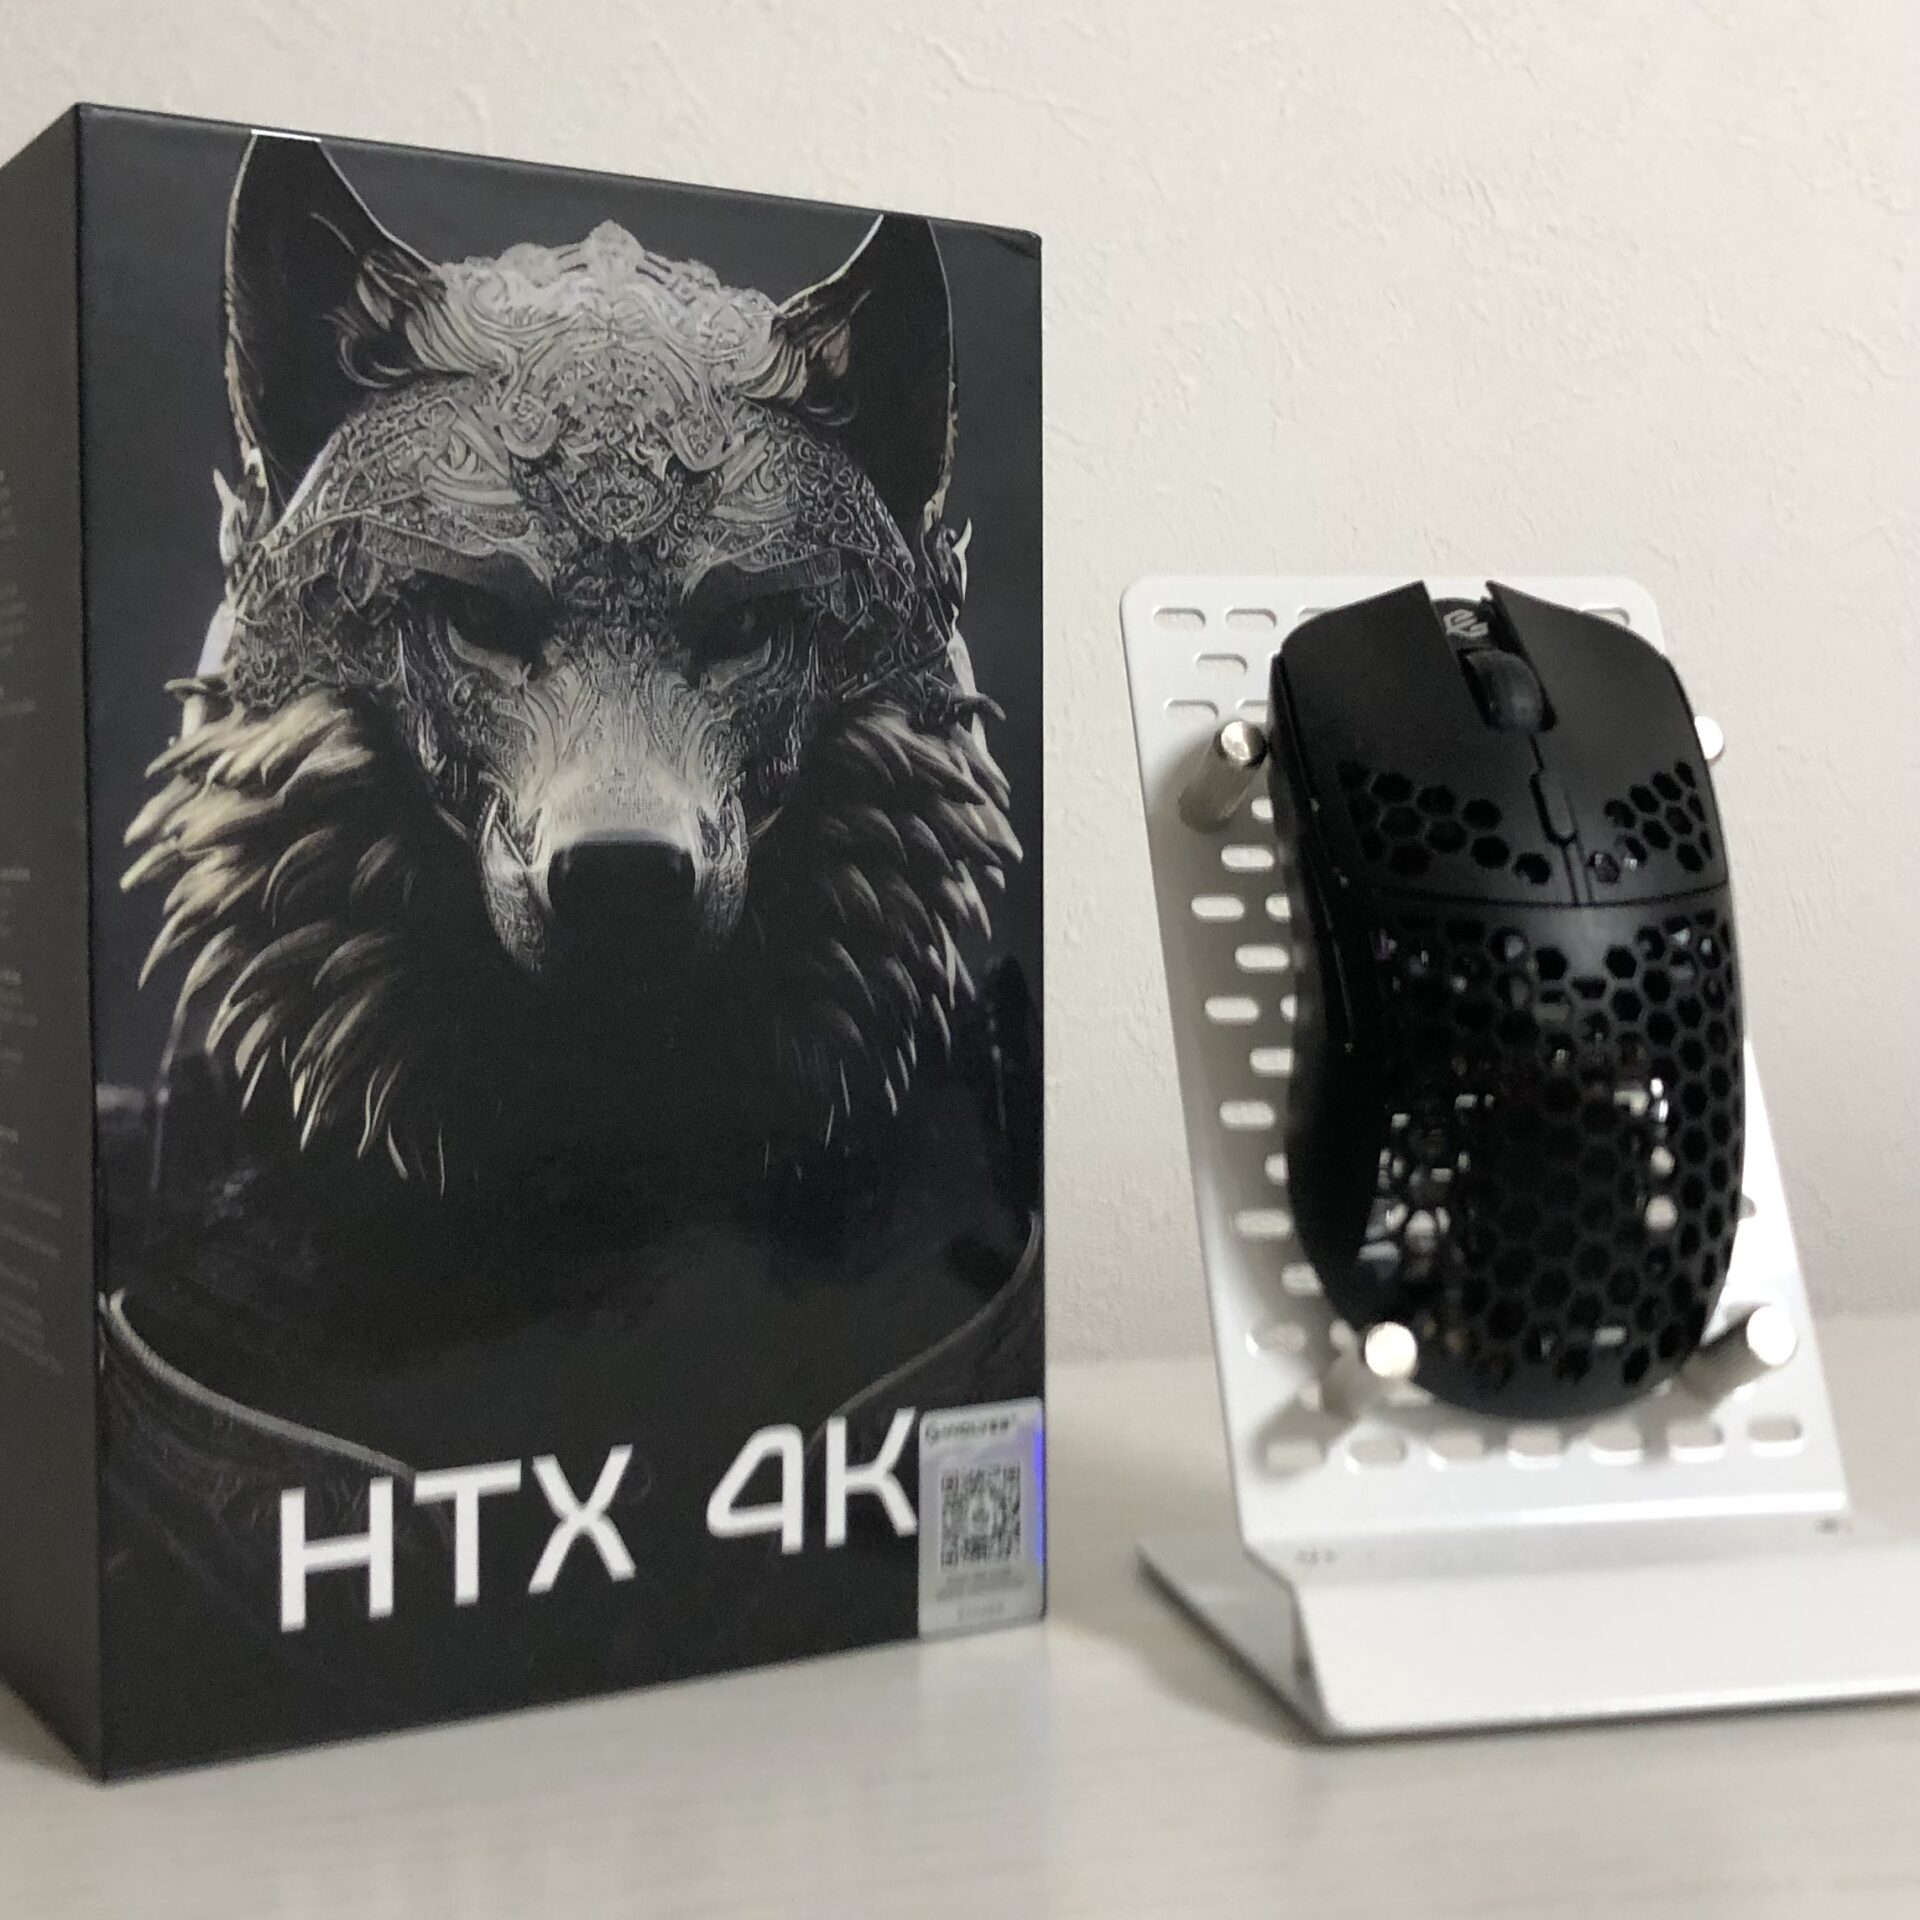 G-Wolves HTX ACE Wireless Black黒 ハニカム穴なし